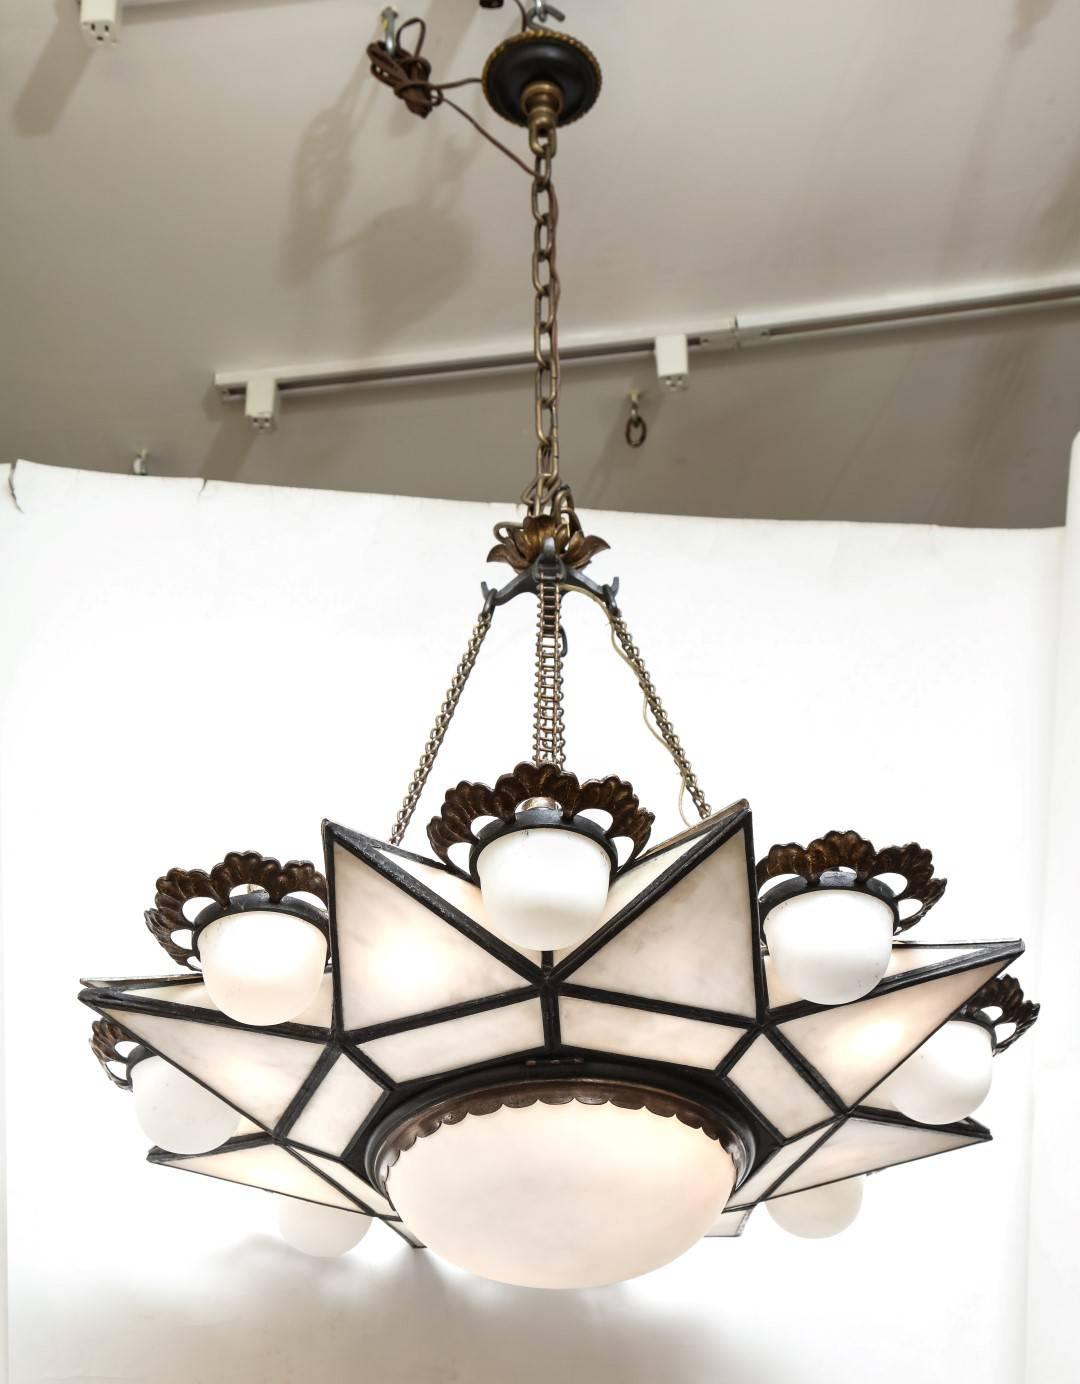 Early 20th Century Bronze-Mounted Moorish Style Ceiling Fixture by E.F. Caldwell